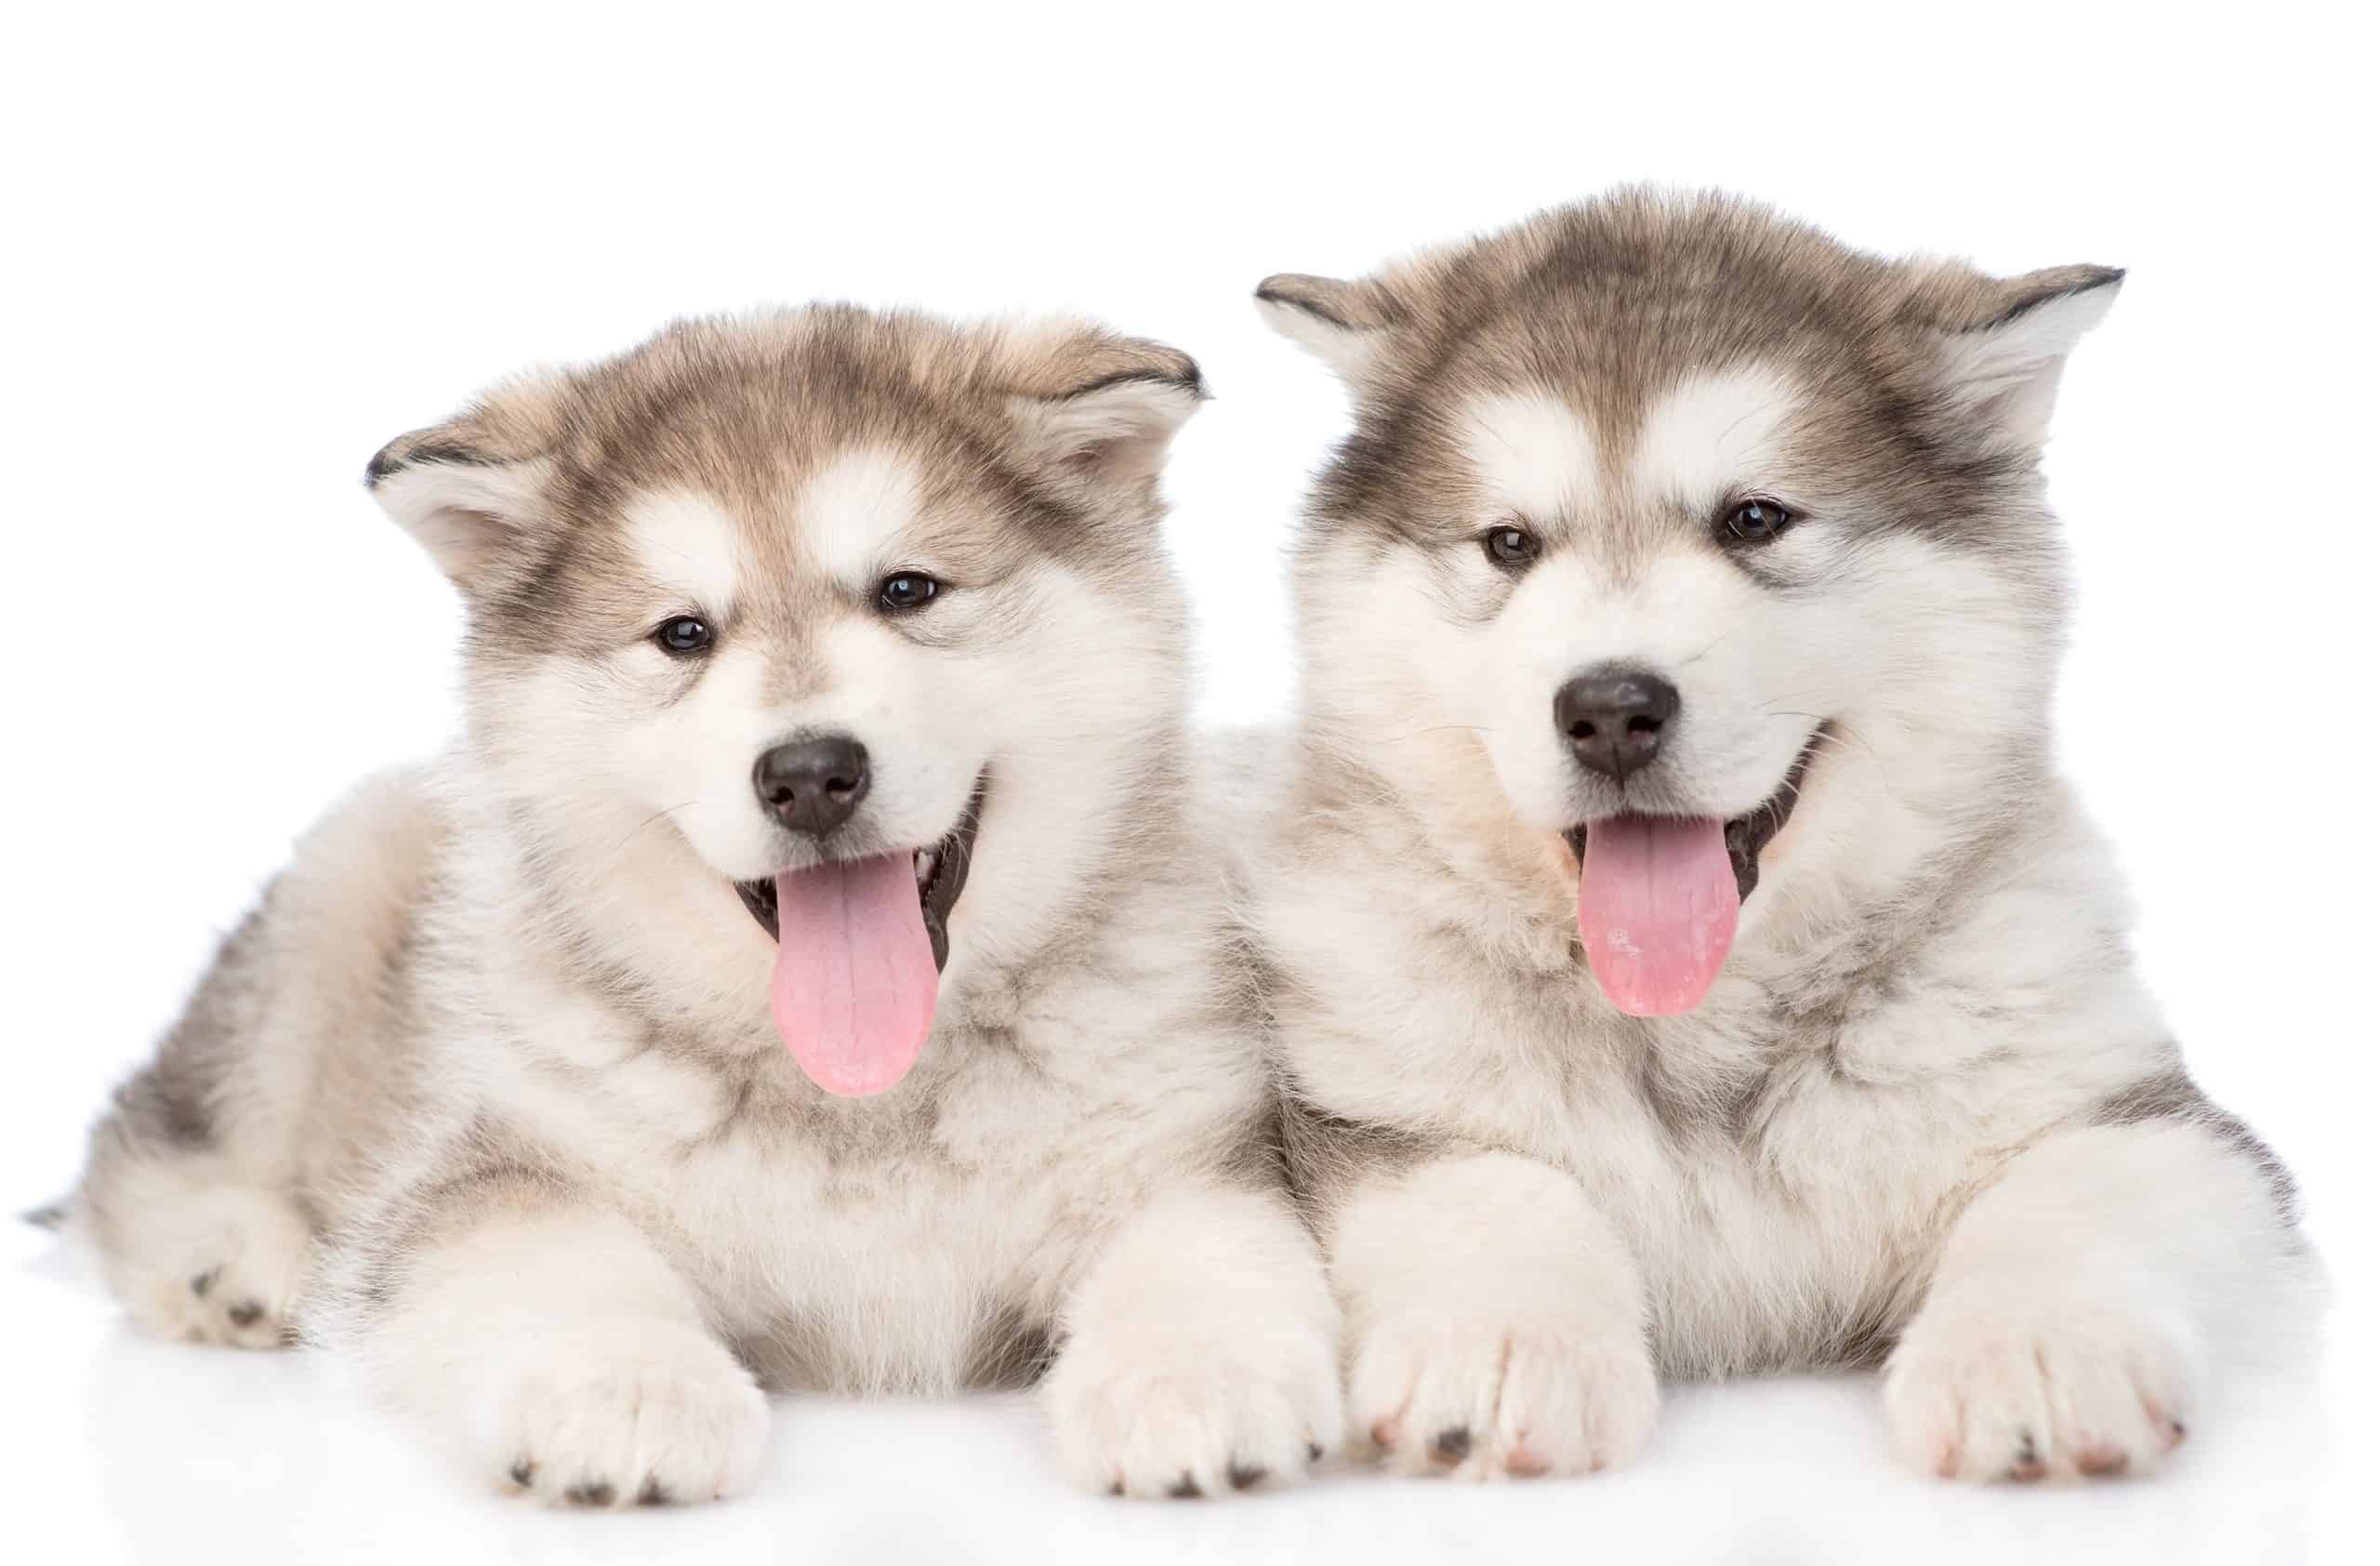 Pair of Alaskan Malamute puppies on white background. Large dogs are full of energy and need the right toys to keep them occupied.